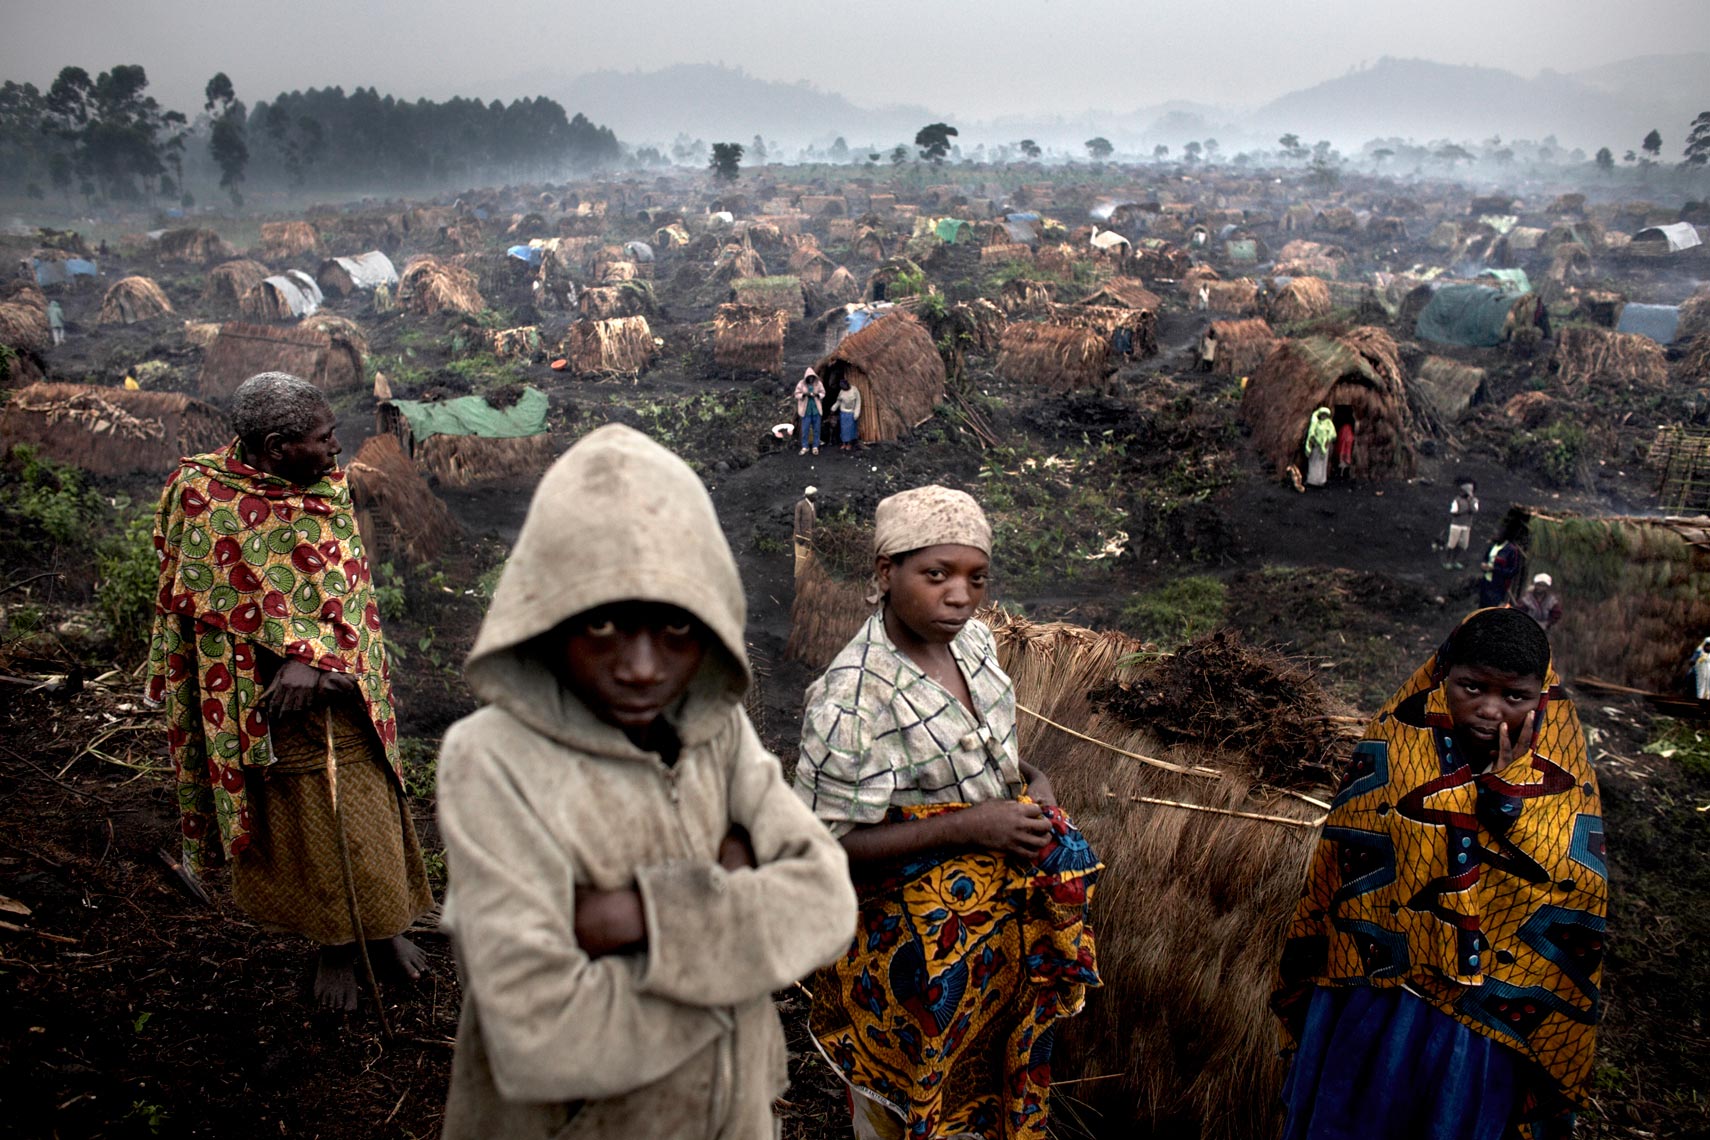 Andrew McConnell. Congo in Crisis. The Chefferie IDP site, home to some 4,000 people, in the town of Kichanga, North Kivu, on Friday, Feb. 15, 2008.